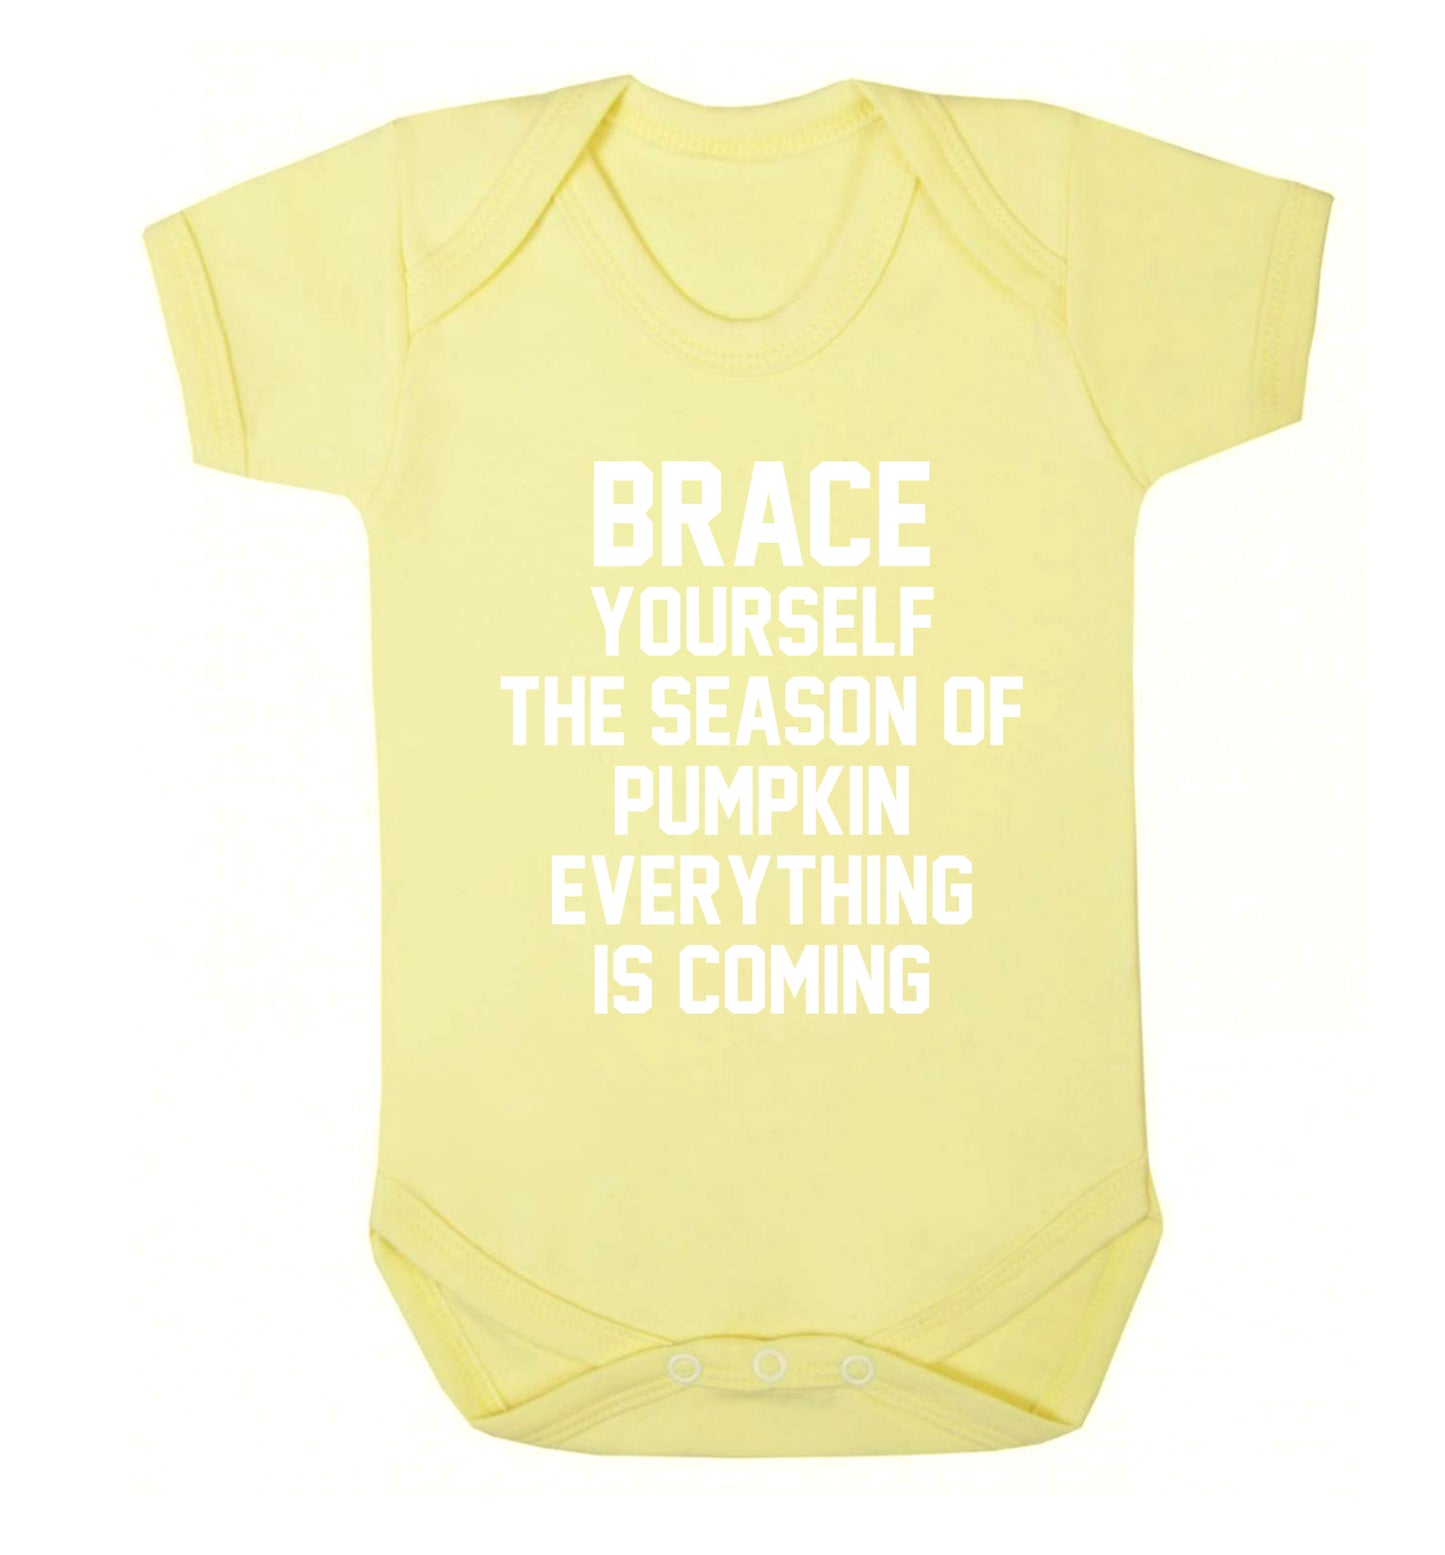 Brace yourself the season of pumpkin everything is coming Baby Vest pale yellow 18-24 months